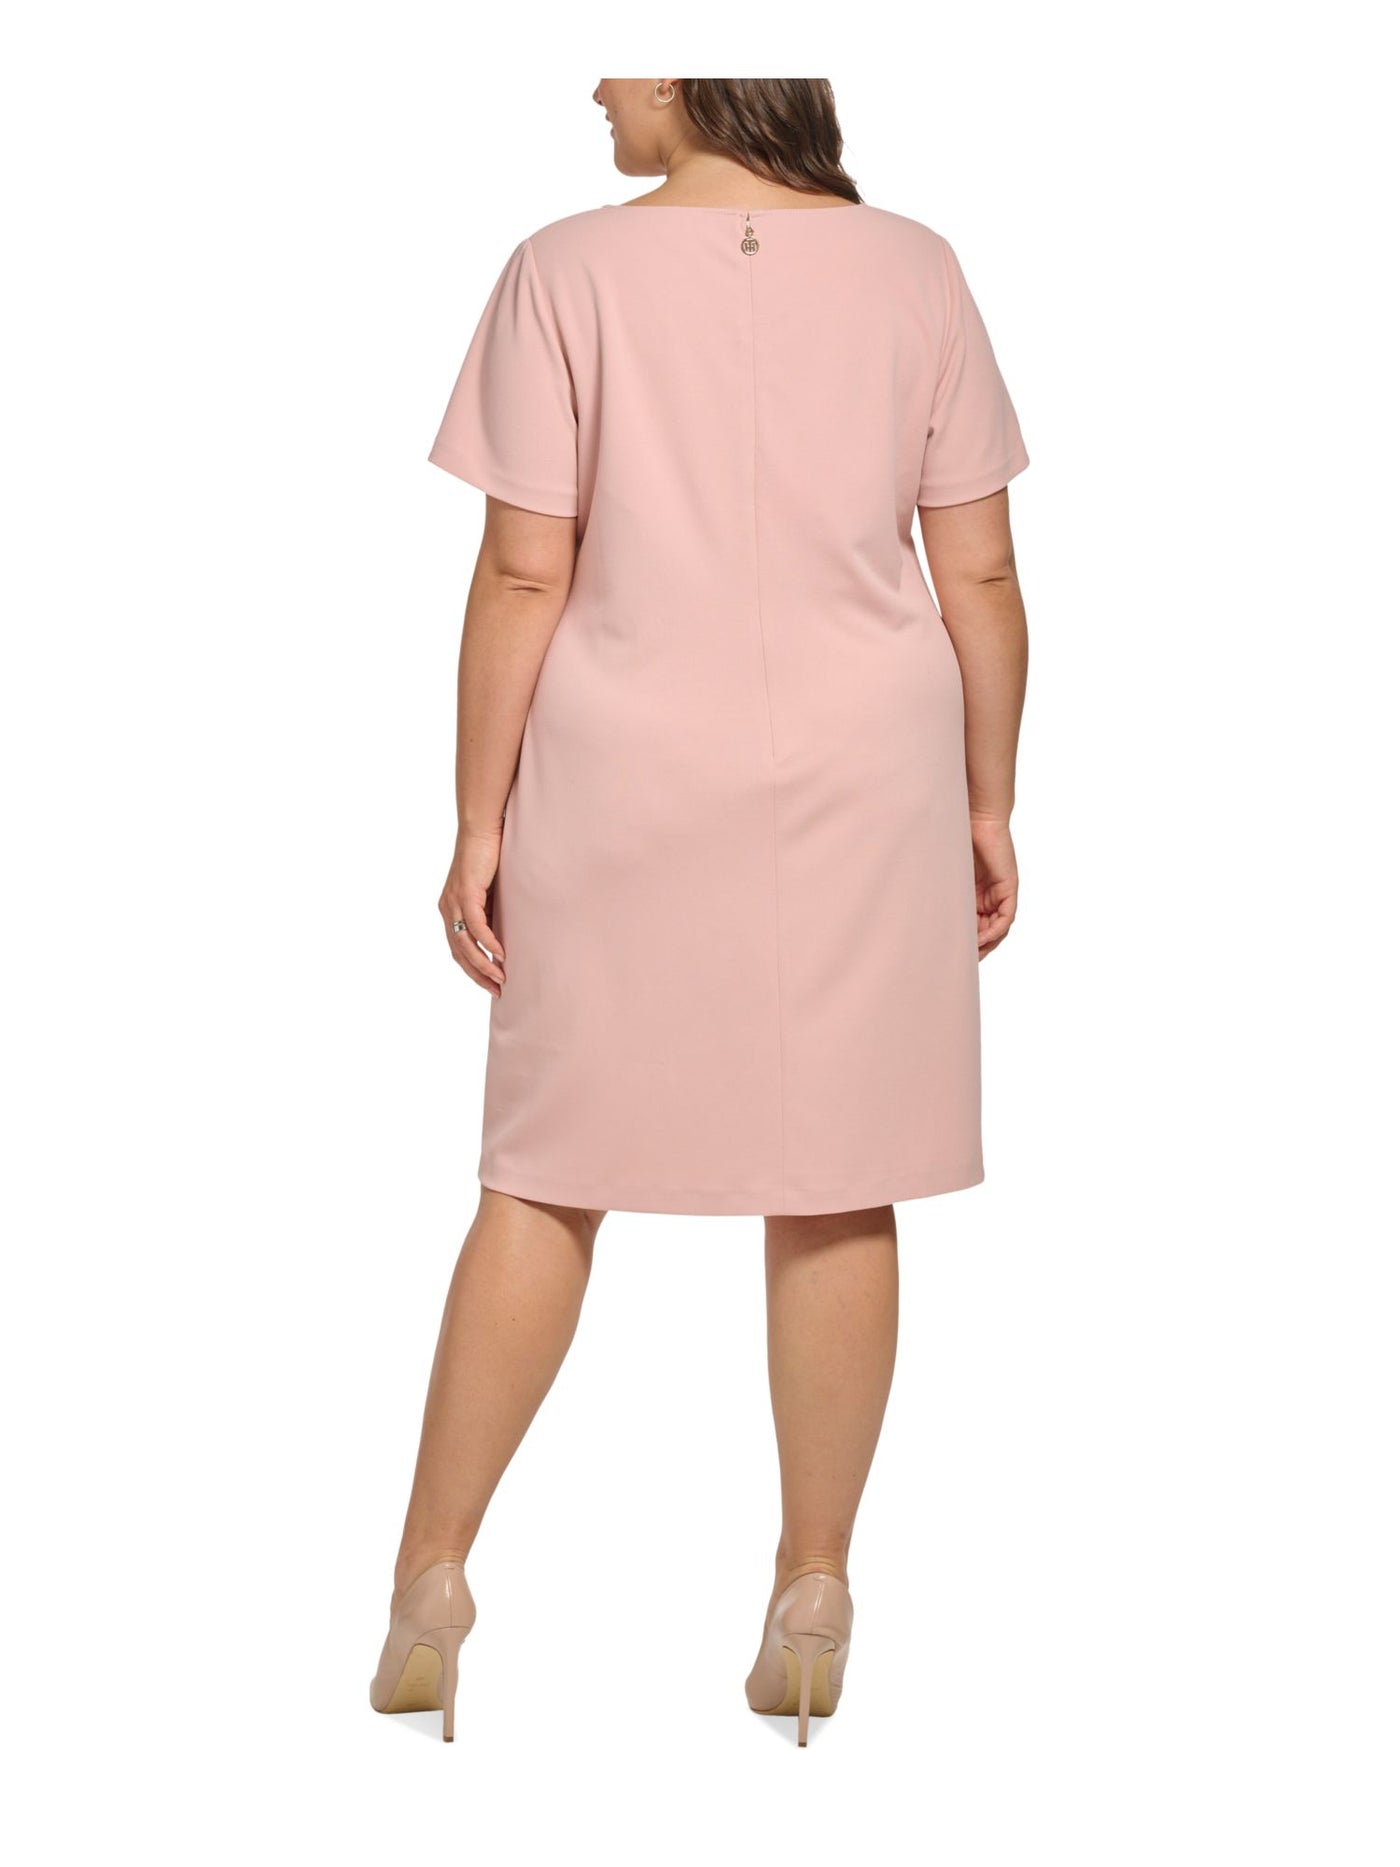 TOMMY HILFIGER Womens Pink Cut Out Zippered Darted Center Seams Short Sleeve Square Neck Knee Length Wear To Work Shift Dress Plus 18W